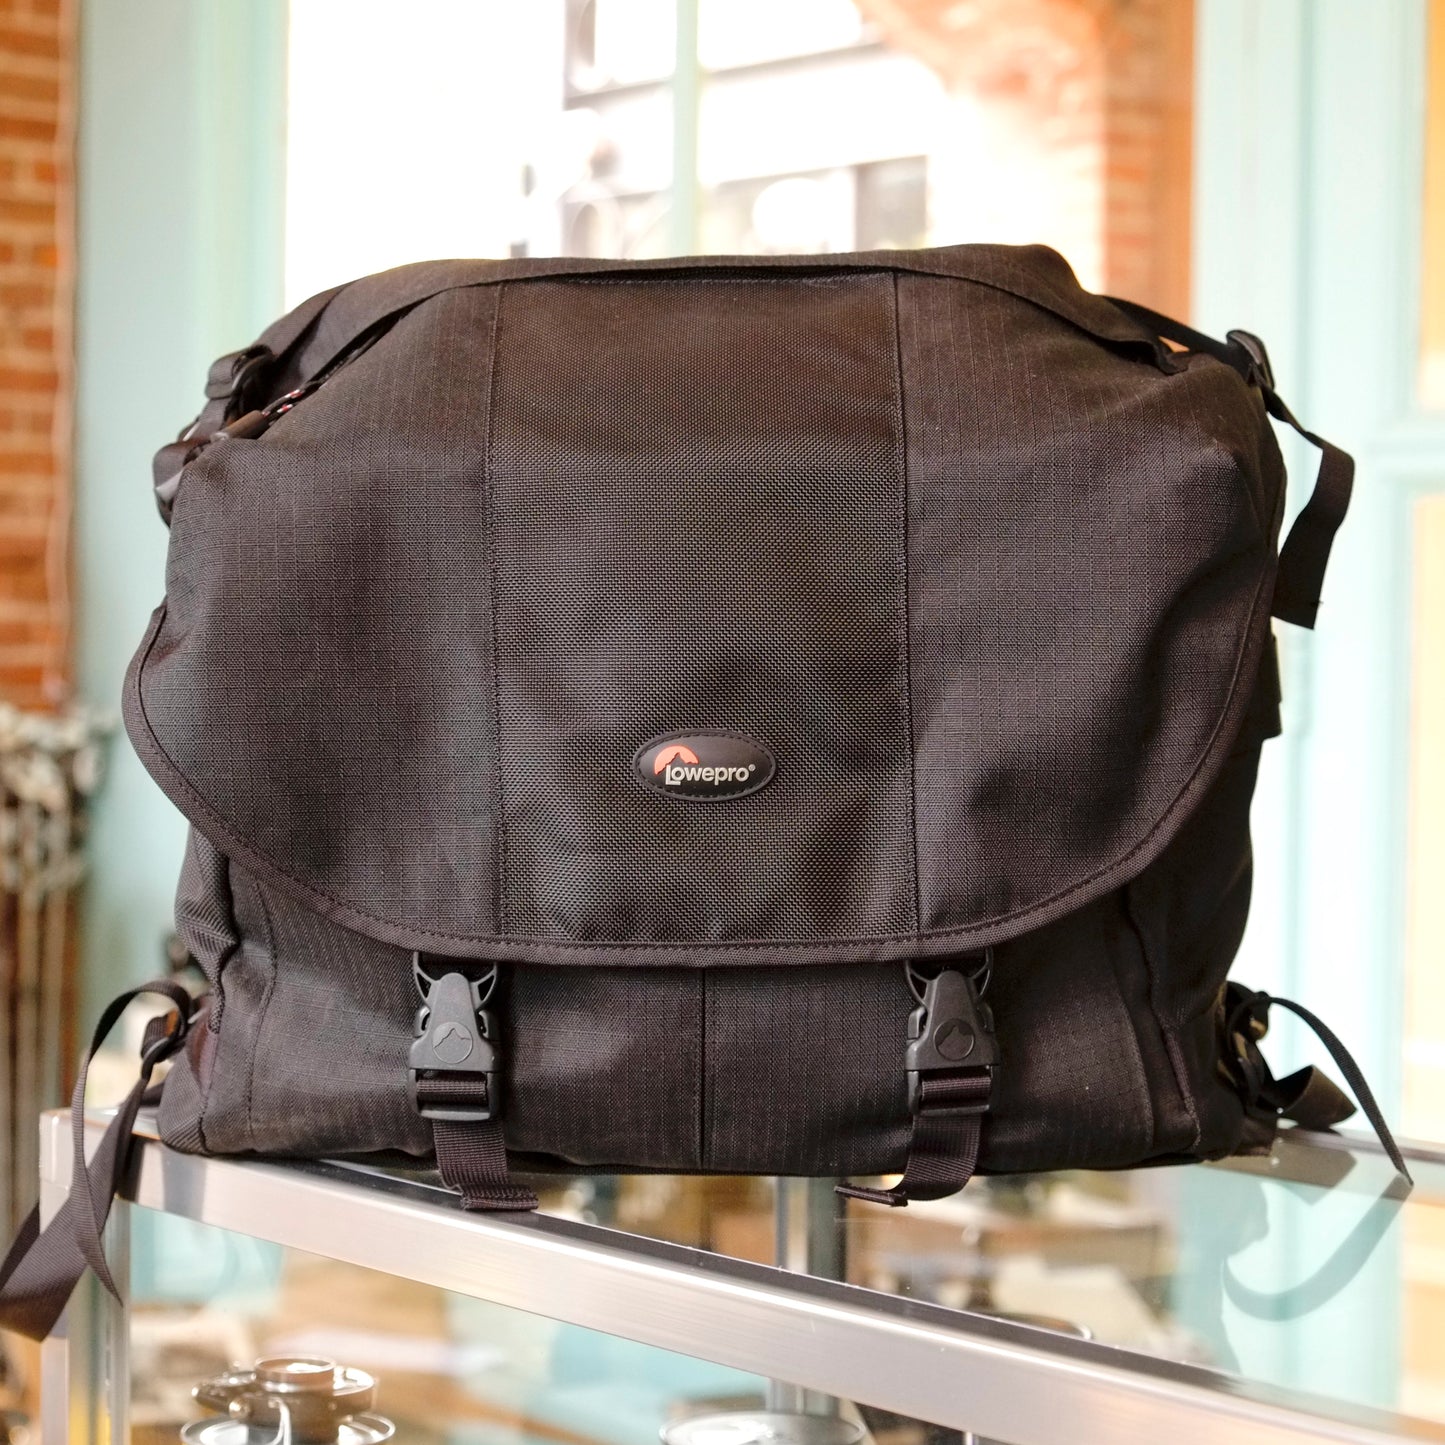 Lowepro Stealth Reporter 650AW